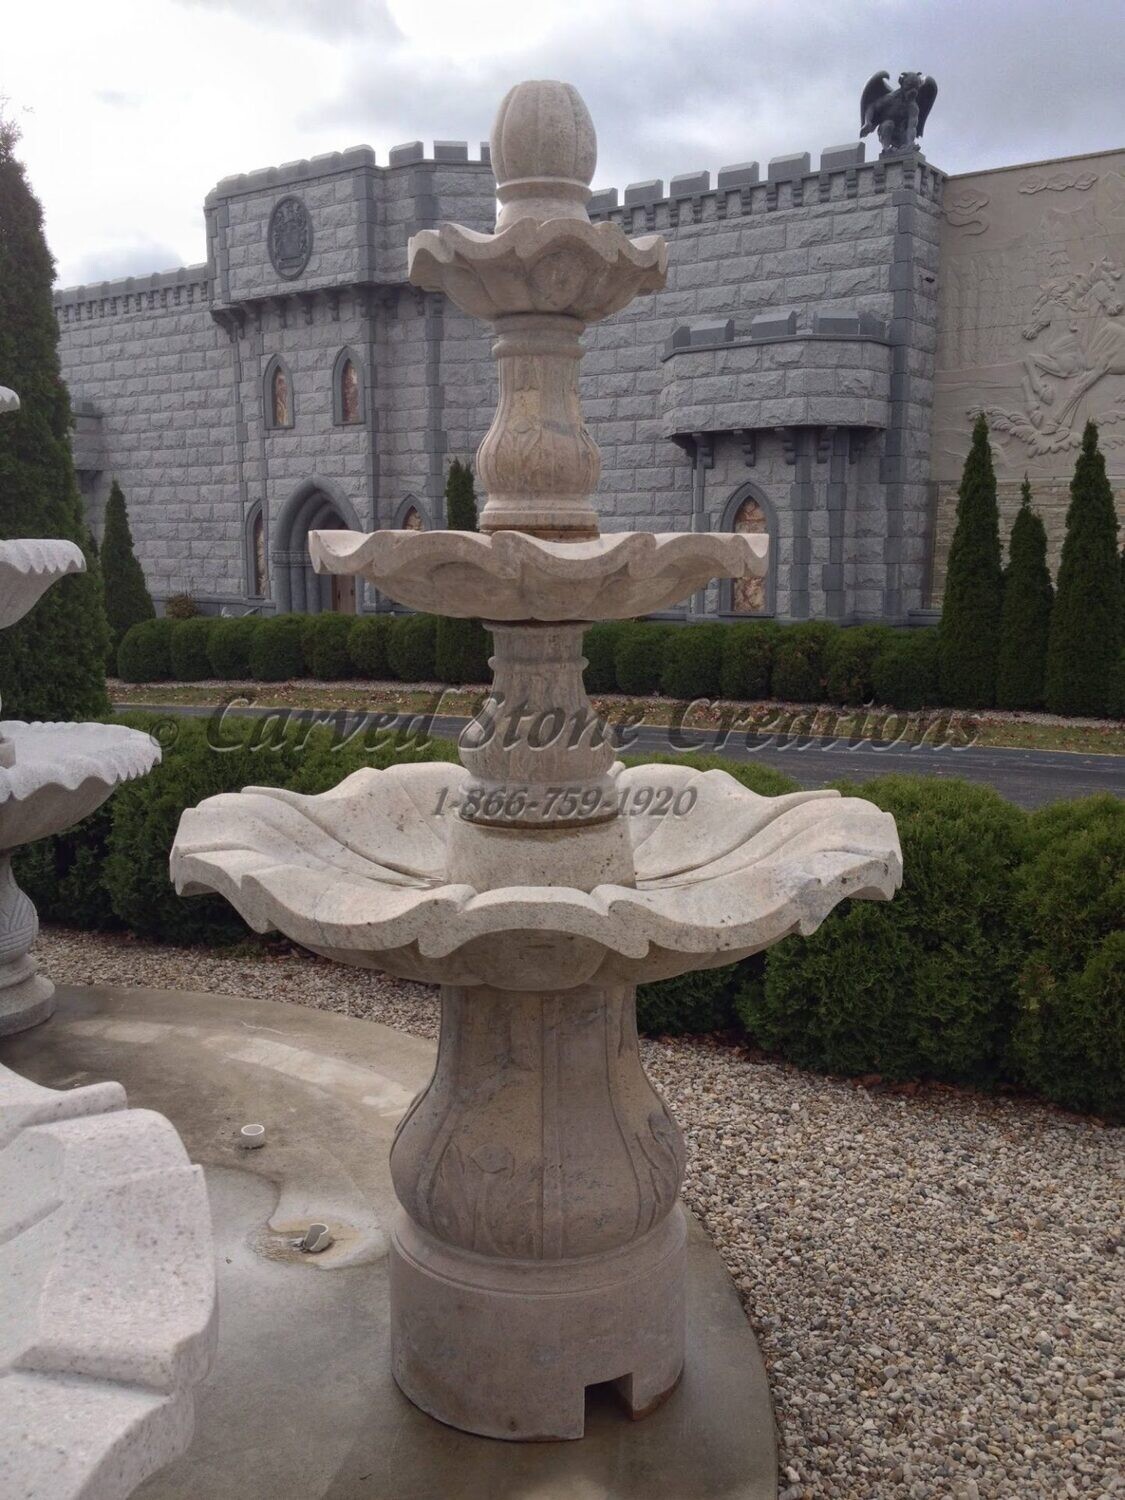 3-Tiered Scalloped Fountain, D54